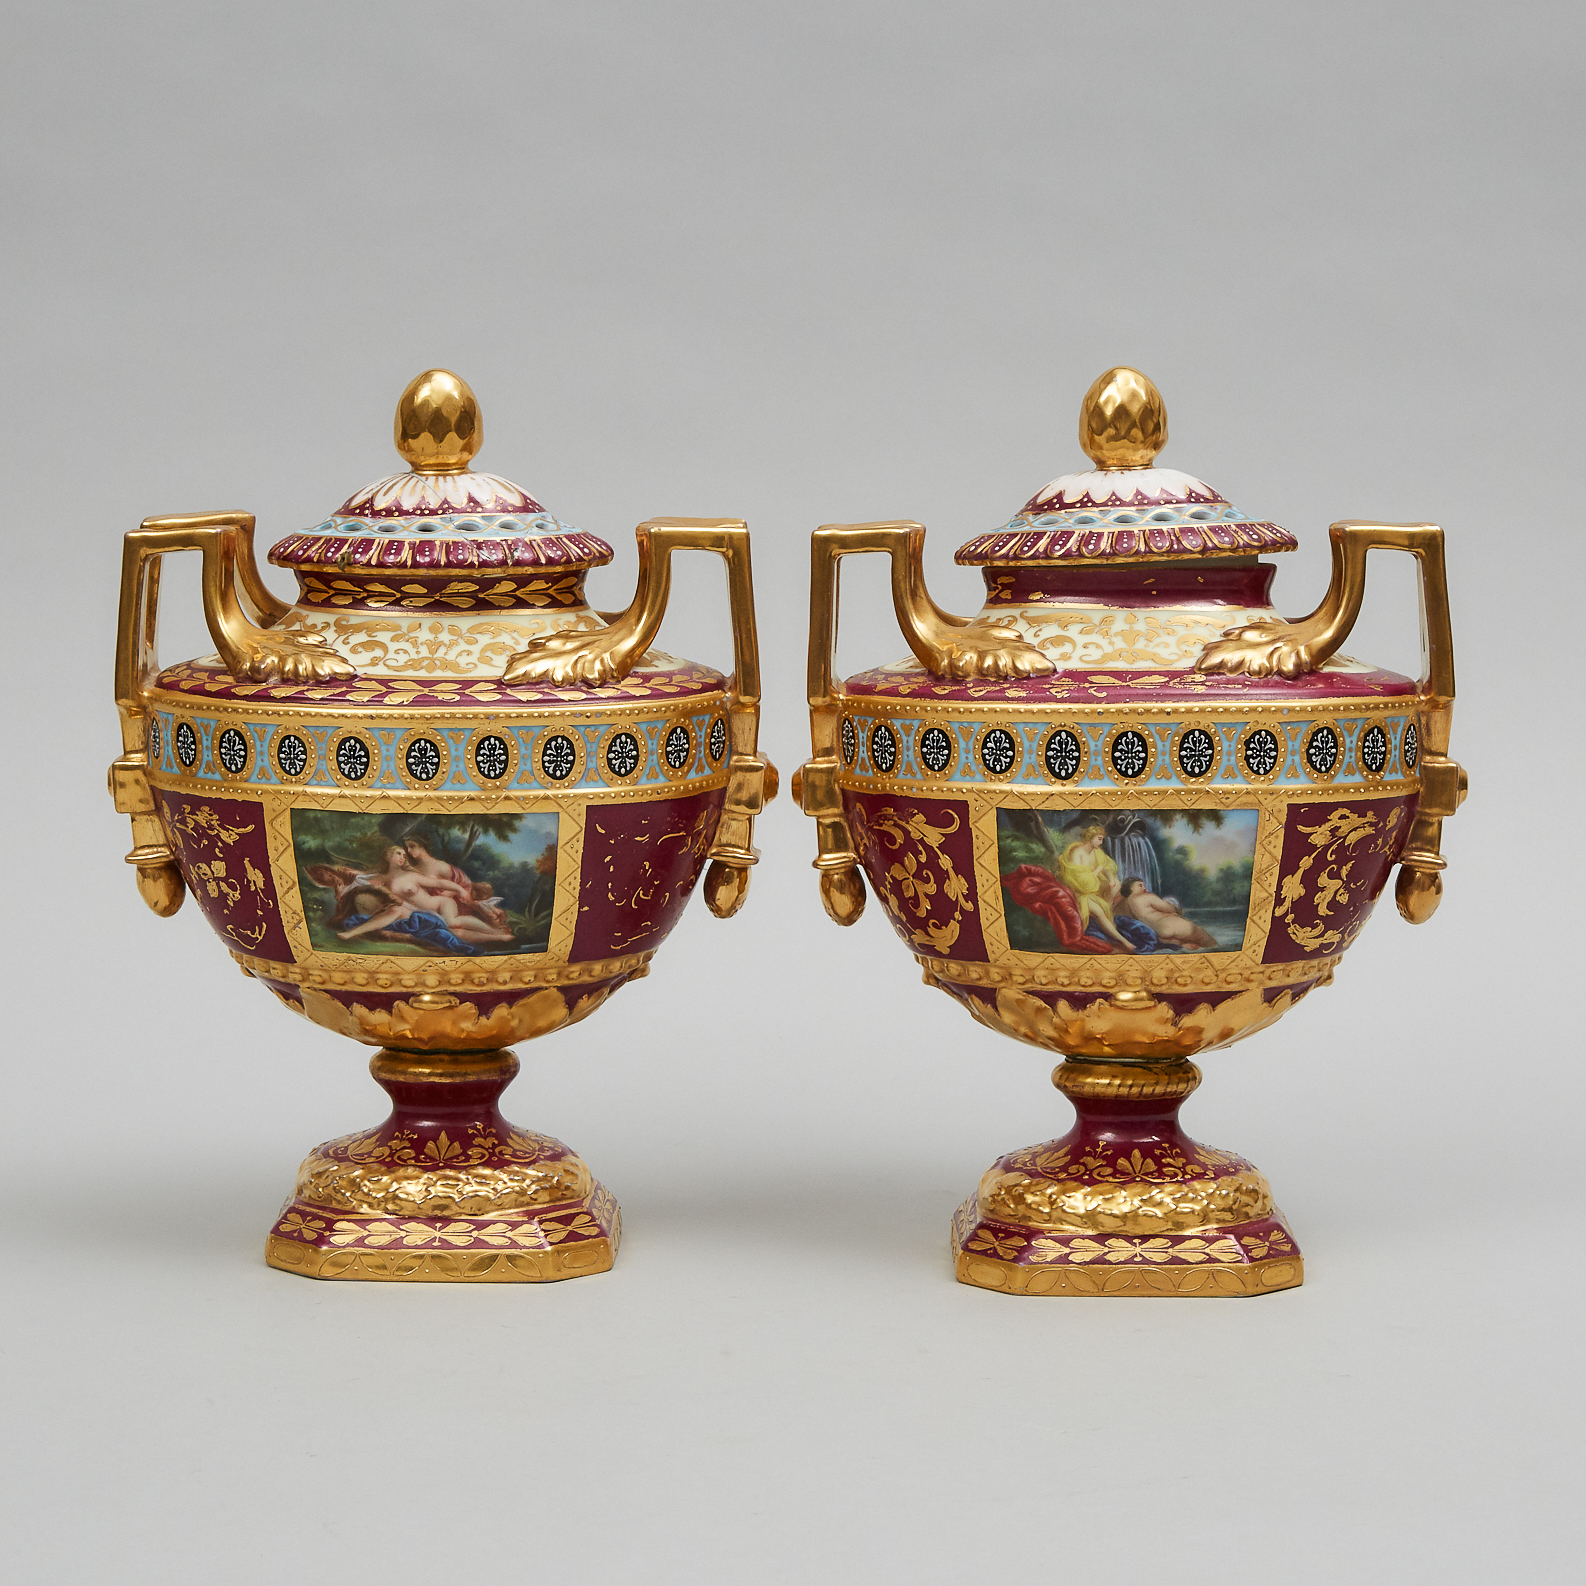 Pair of 'Vienna' Two-Handled Covered Vases, late 19th century